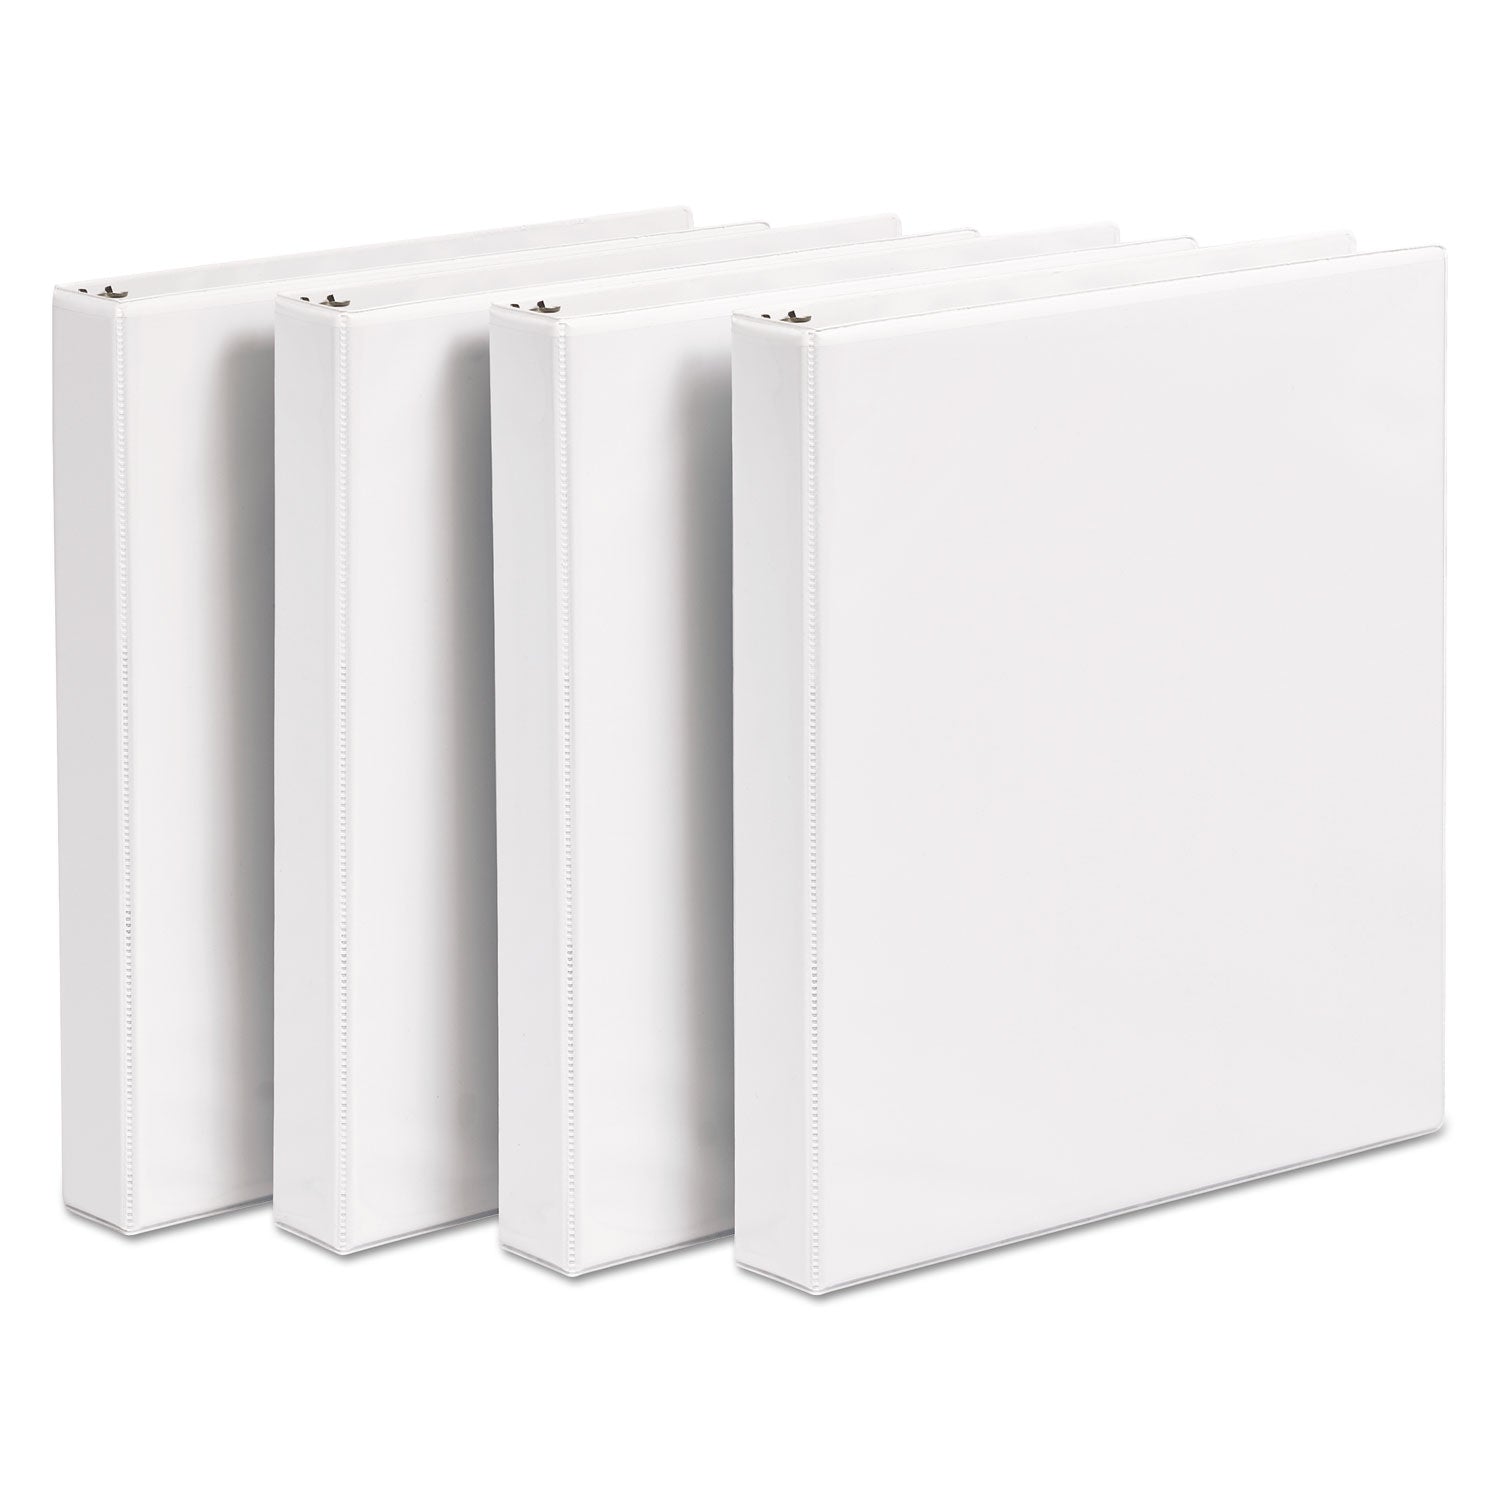 durable-view-binder-with-durahinge-and-slant-rings-3-rings-1-capacity-11-x-85-white-4-pack_ave17575 - 8